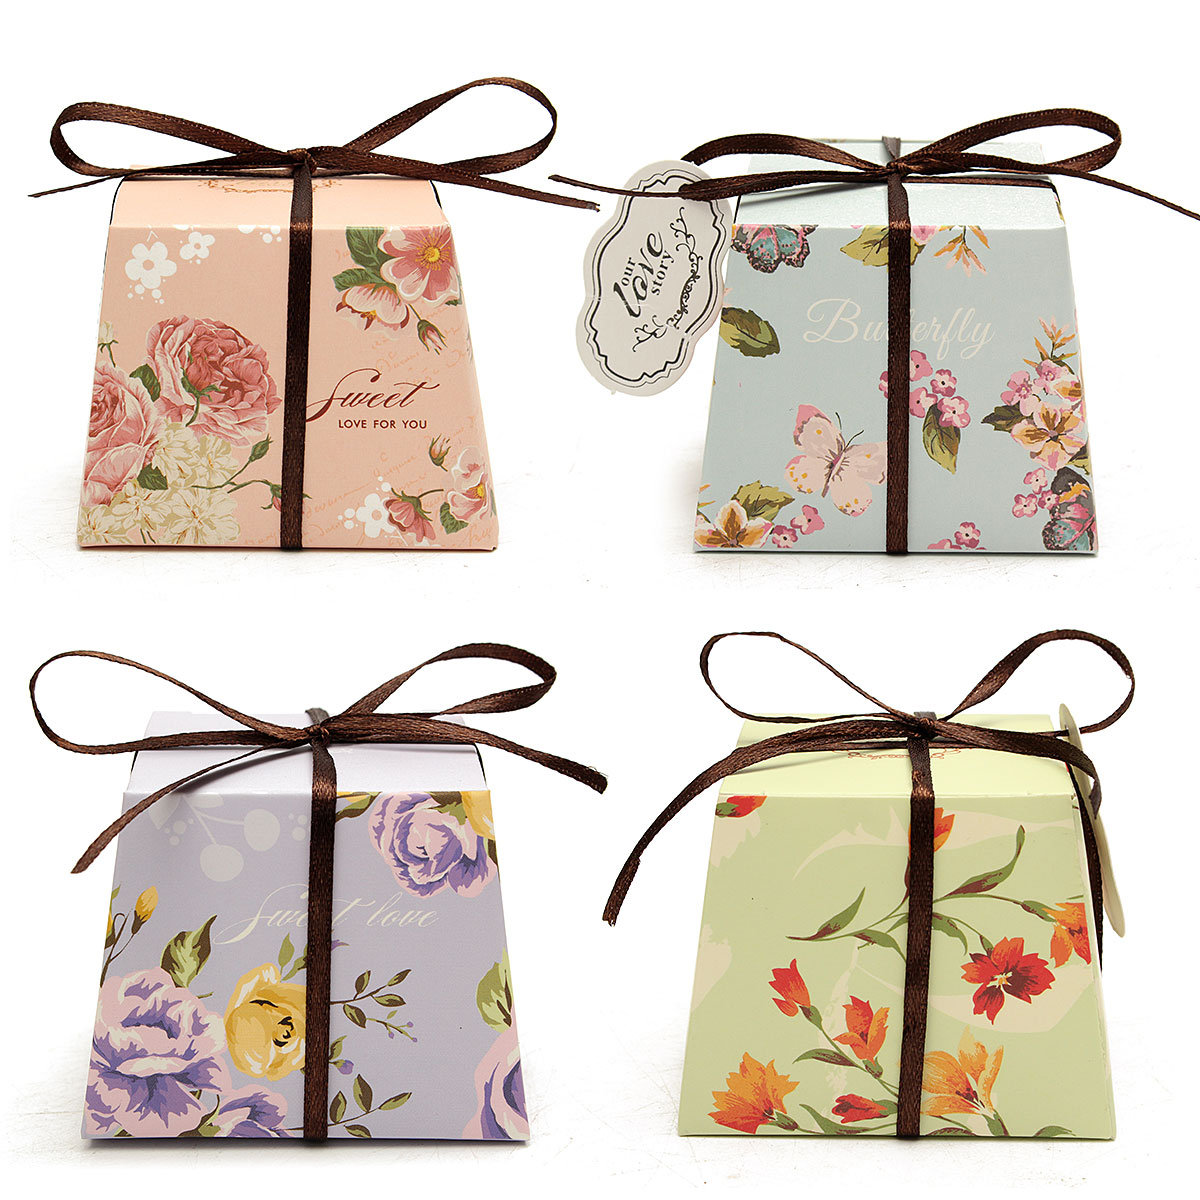 

10Pcs Floral Printed Ribbon Card Candy Box Birthday Gift Boxes Wedding Favors Party Supplies, Pink purple blue green